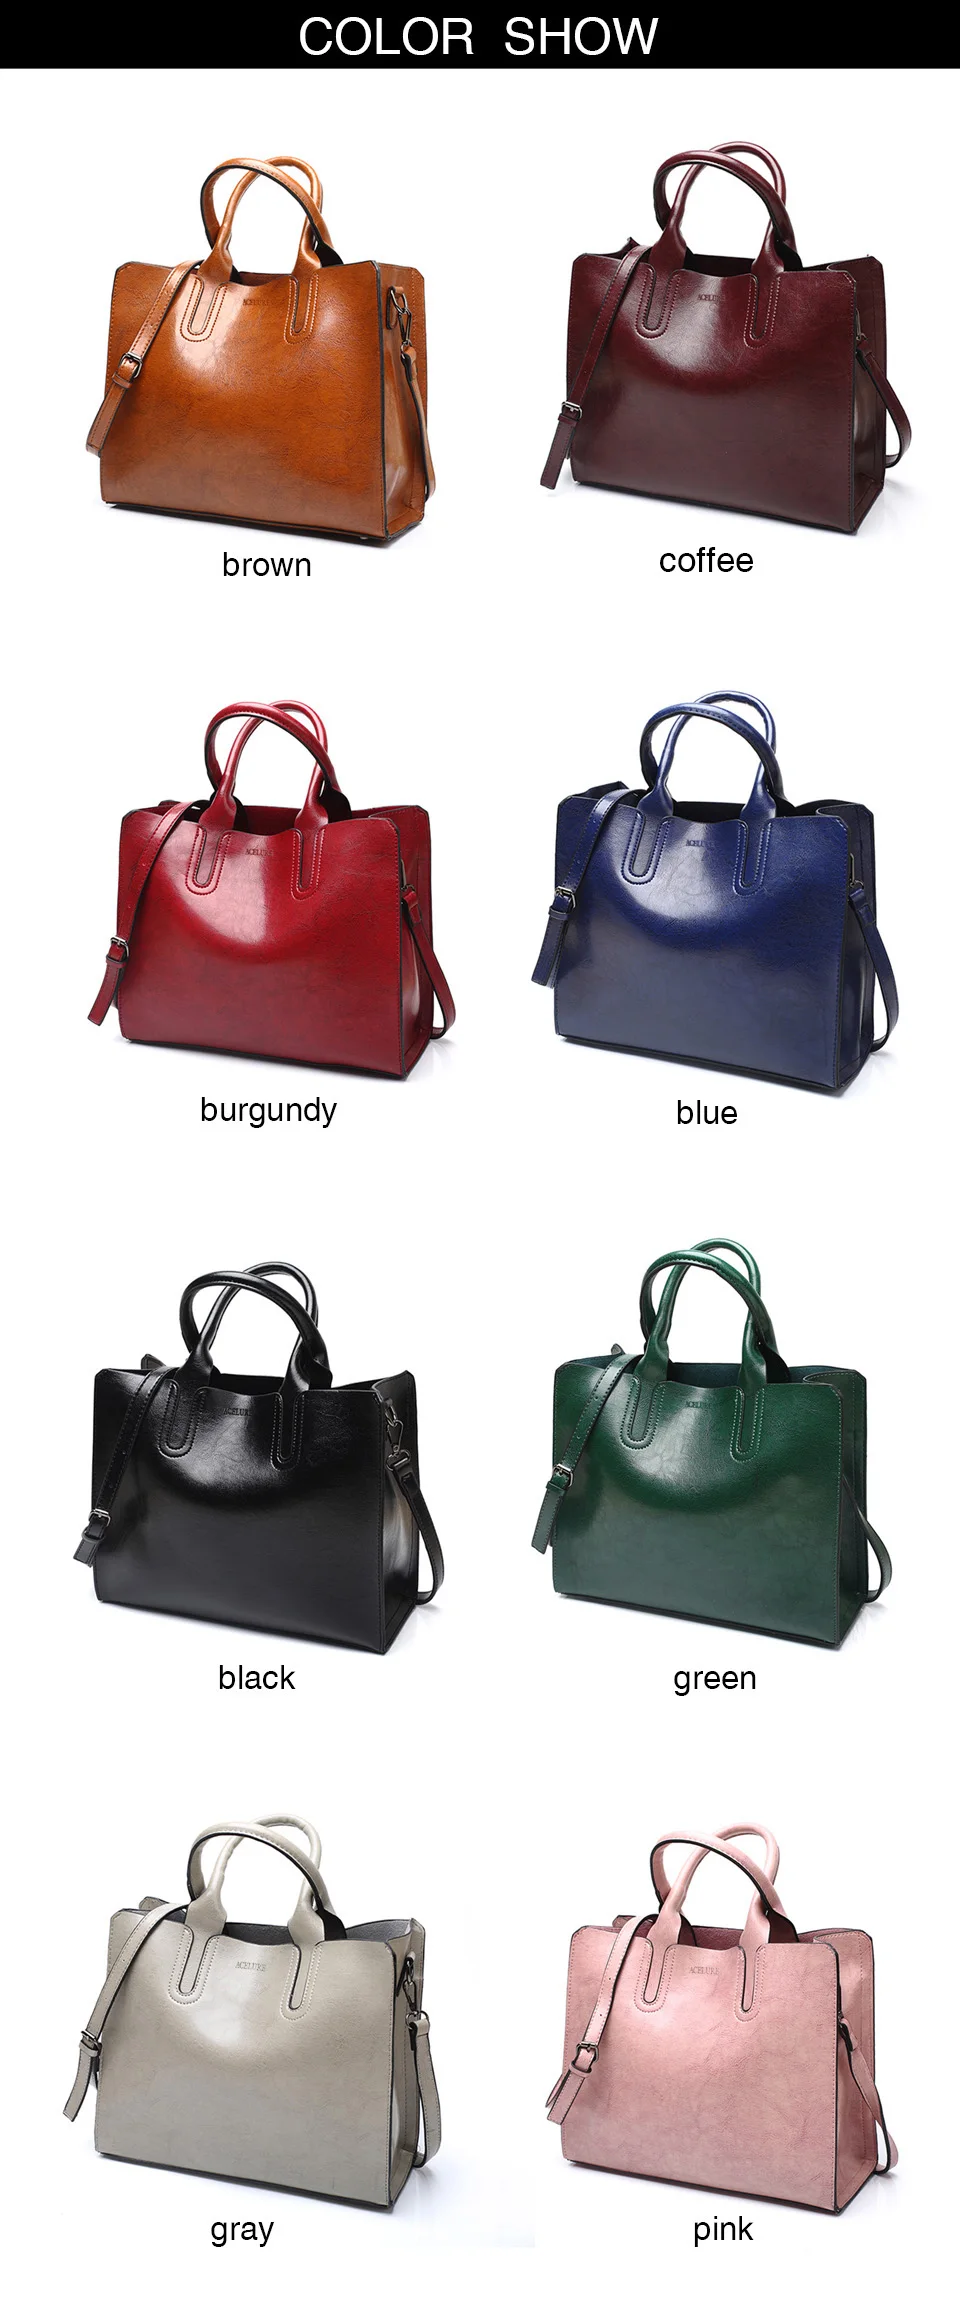 Trunk Tote Spanish Brand Leather Big High Quality Casual Female Shoulder Handbags_03